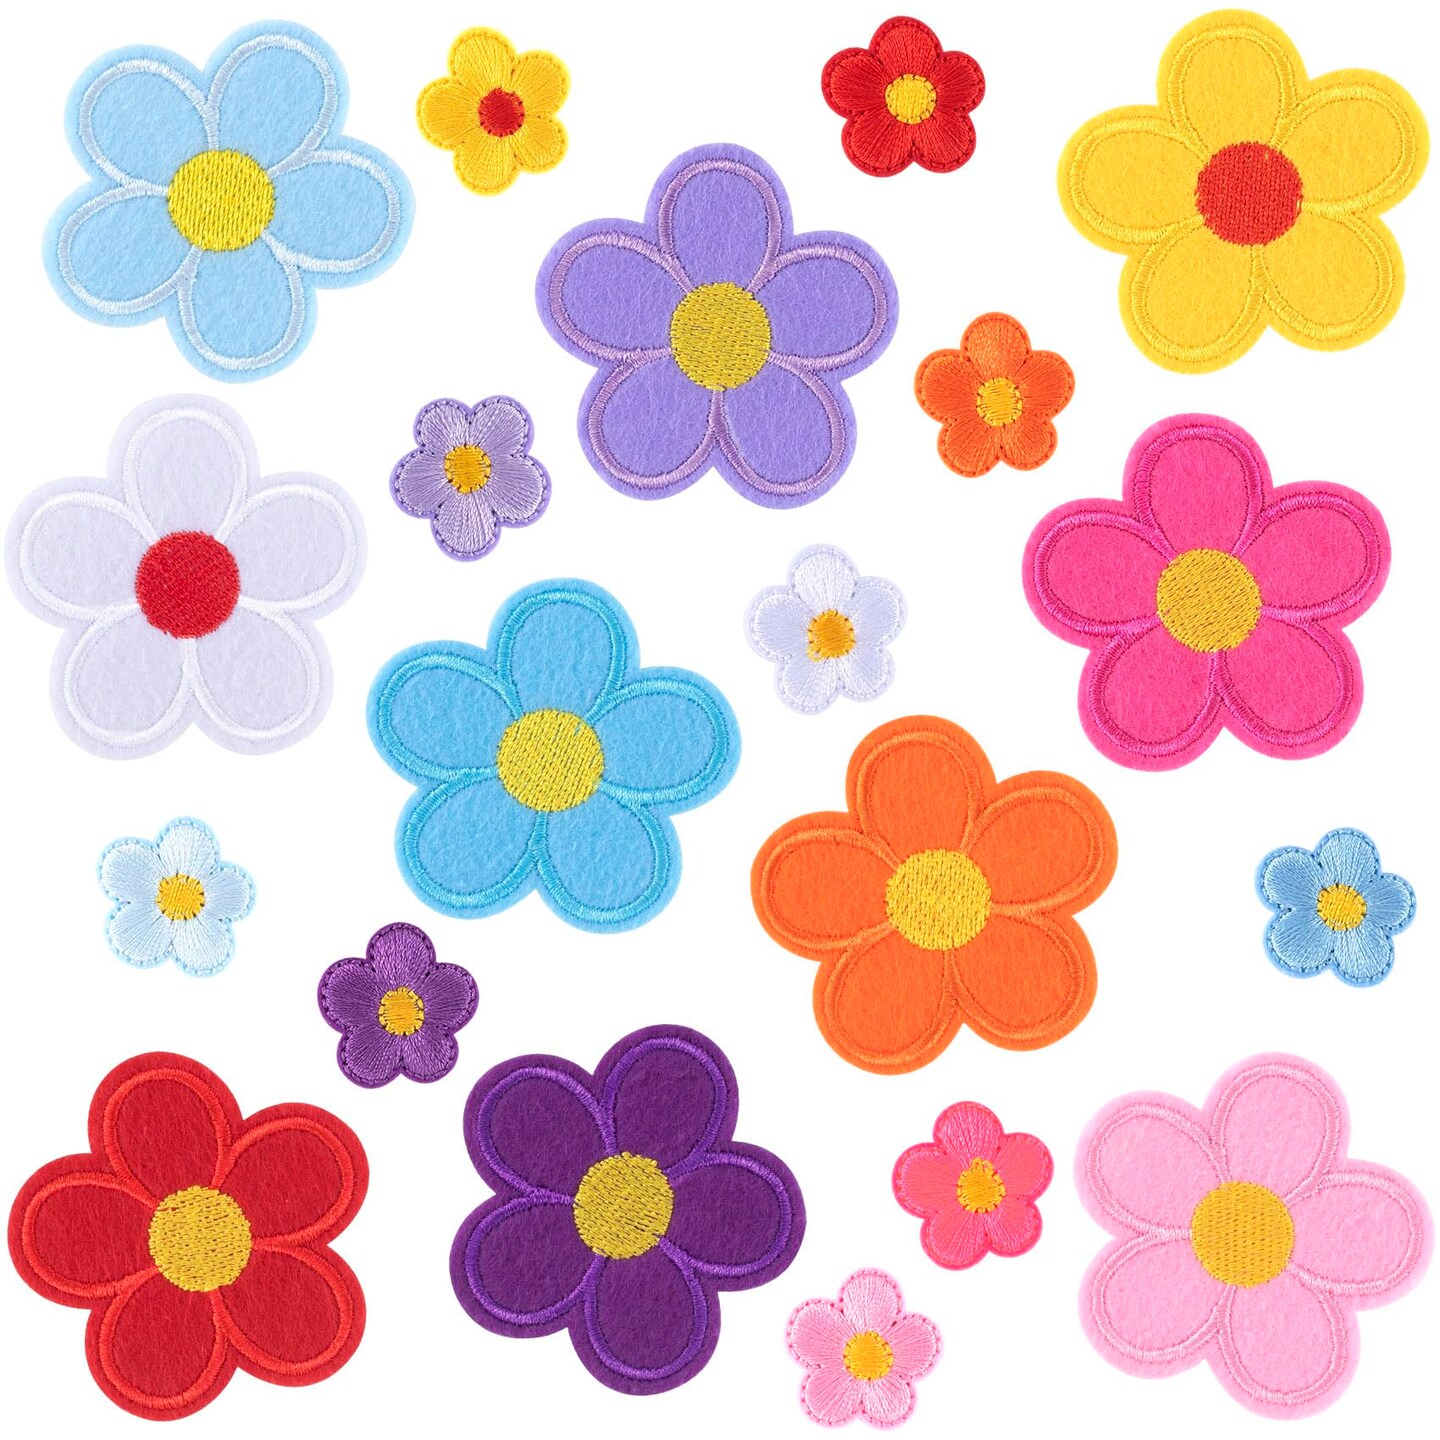 PAGOW 20 Pcs Cute Flower Iron on Patches, 5 Petals Flower Applique Patch, Small Sew On Embroidered Applique Sewing Patches for Backpacks, Bags, Jackets, Jeans, Clothes (2 Sizes, 20 Colors)